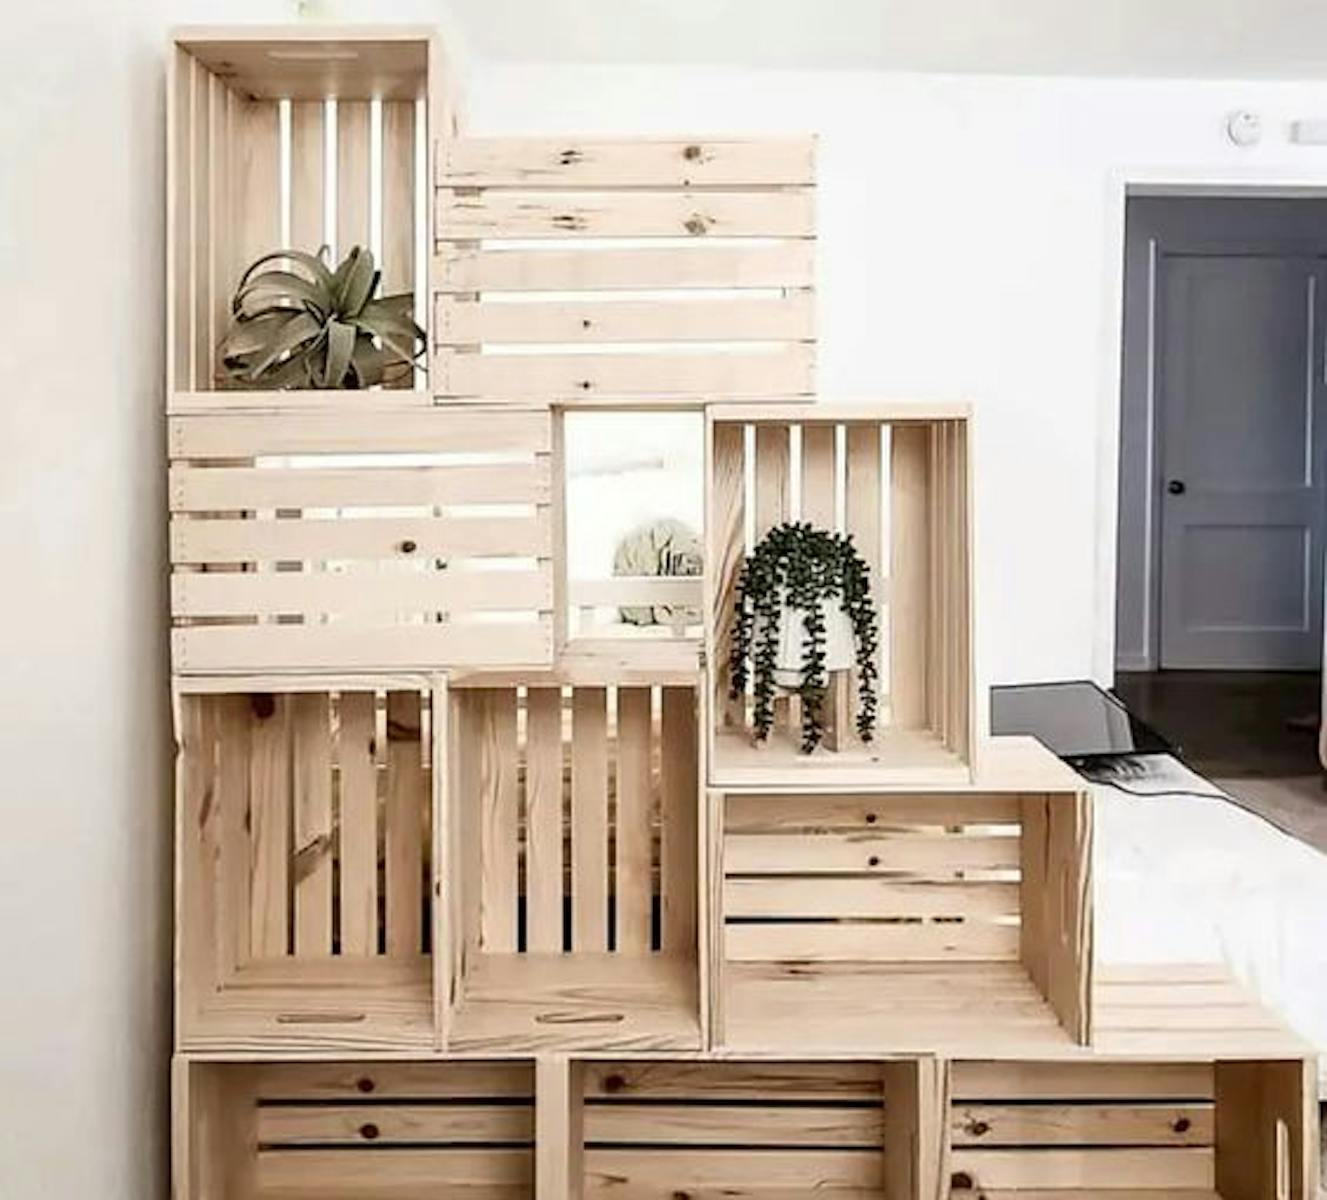 Wooden boxes are sustainable
